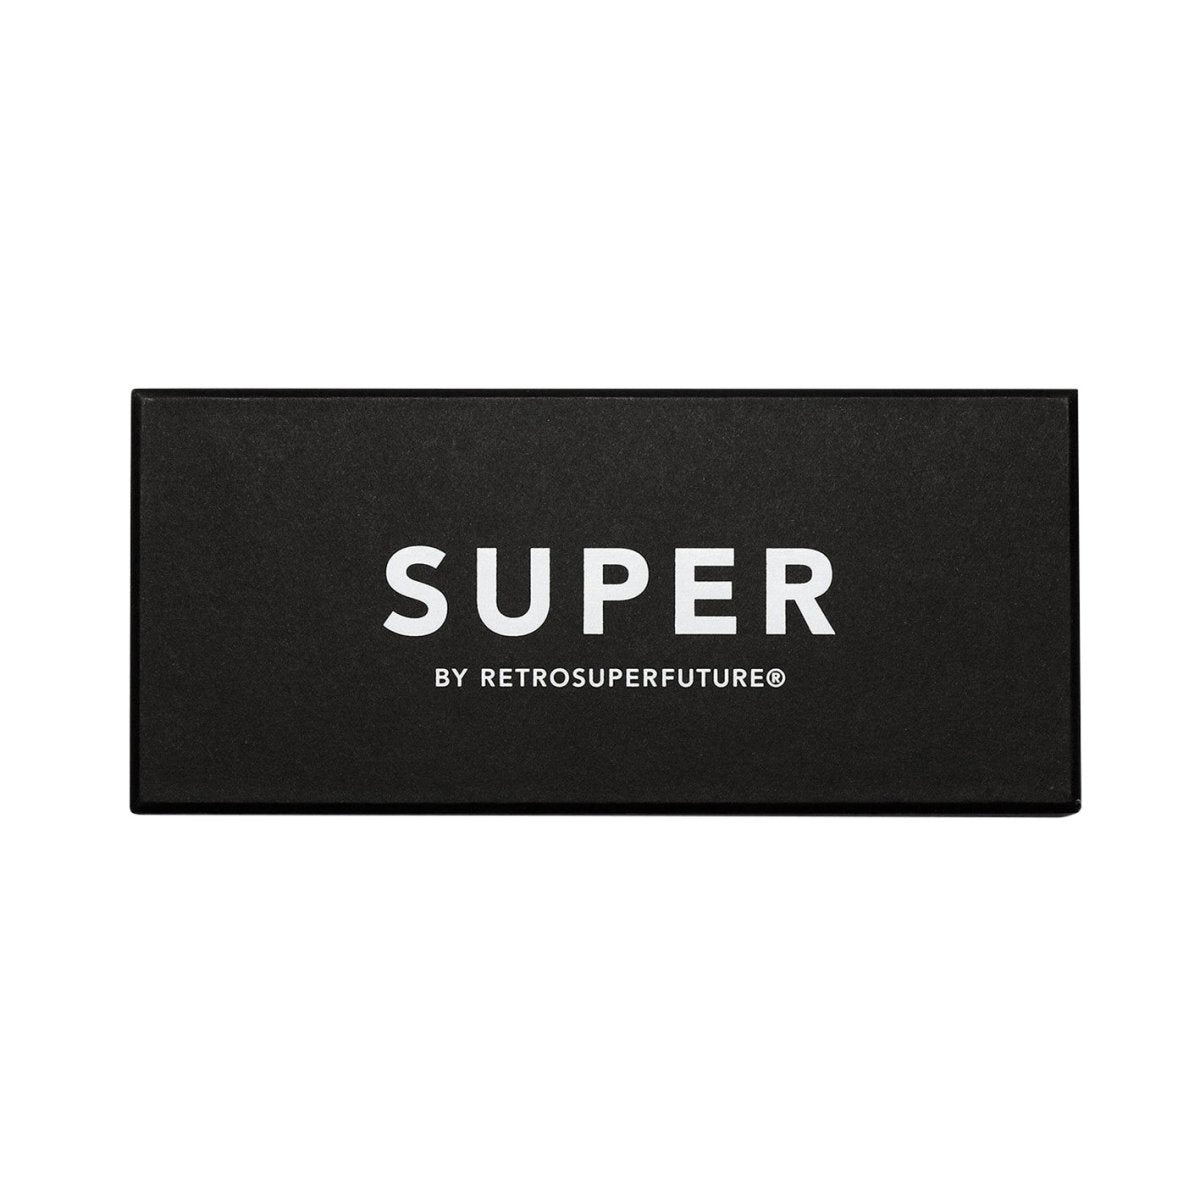 Super by Retrosuperfuture Andy Warhol The Iconic Series (Schwarz)  - Allike Store